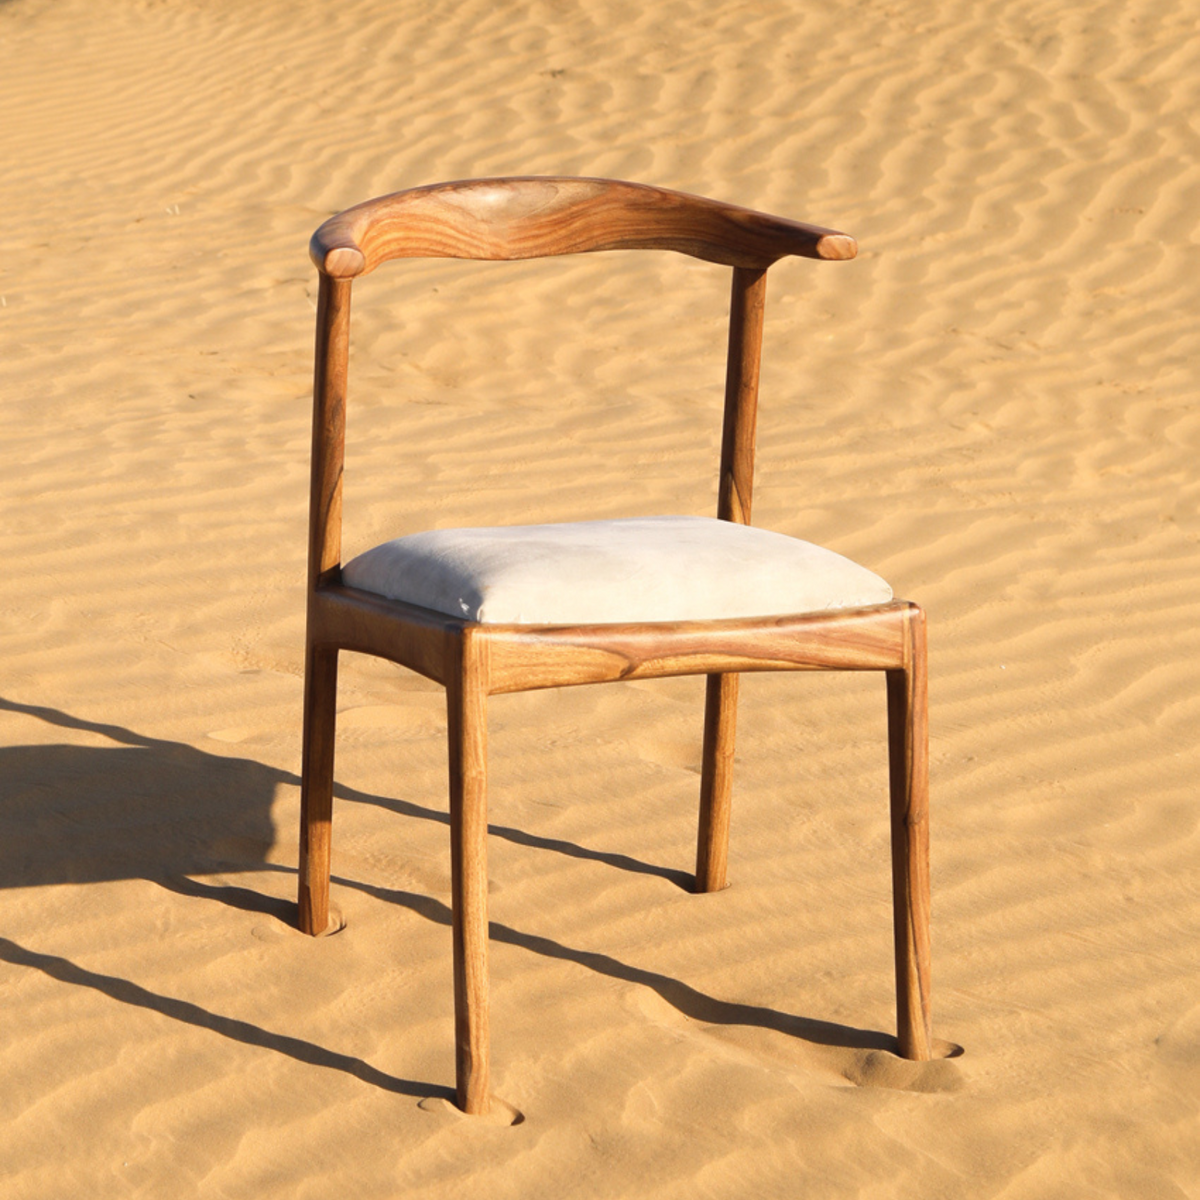 Dado Chair Without Arms